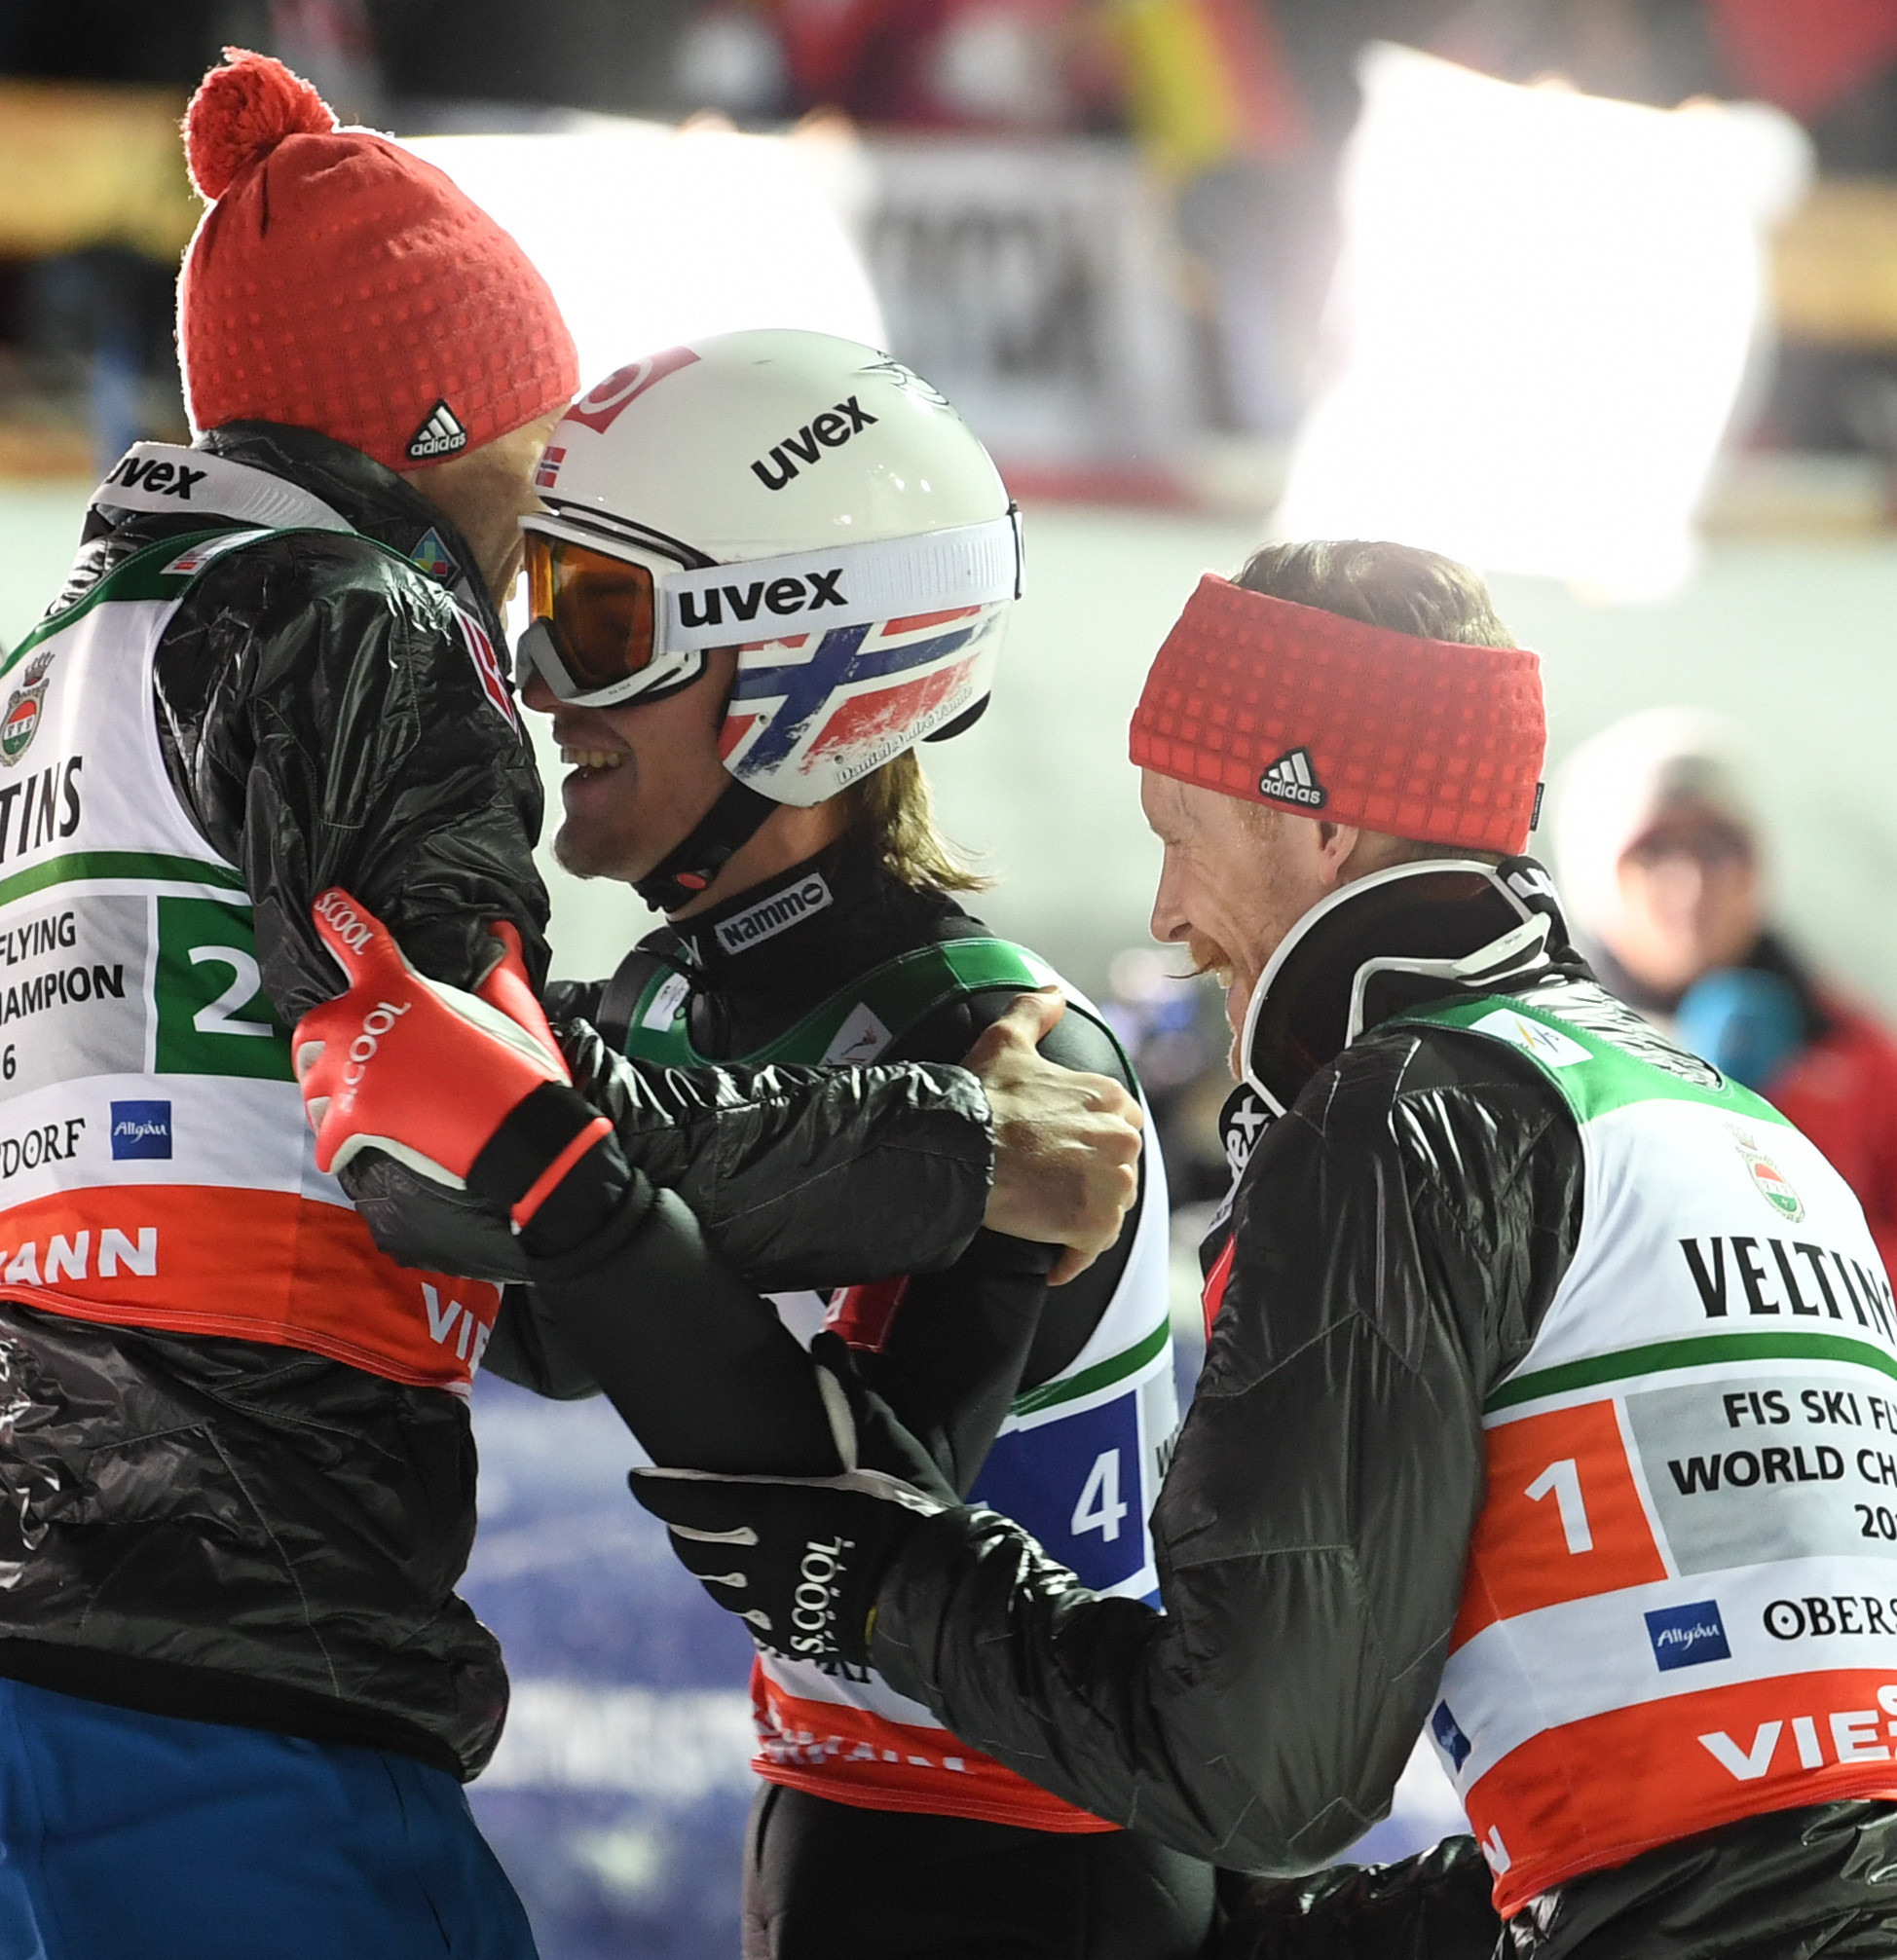 New ski flying world champion Tande to miss World Cup resumption with virus